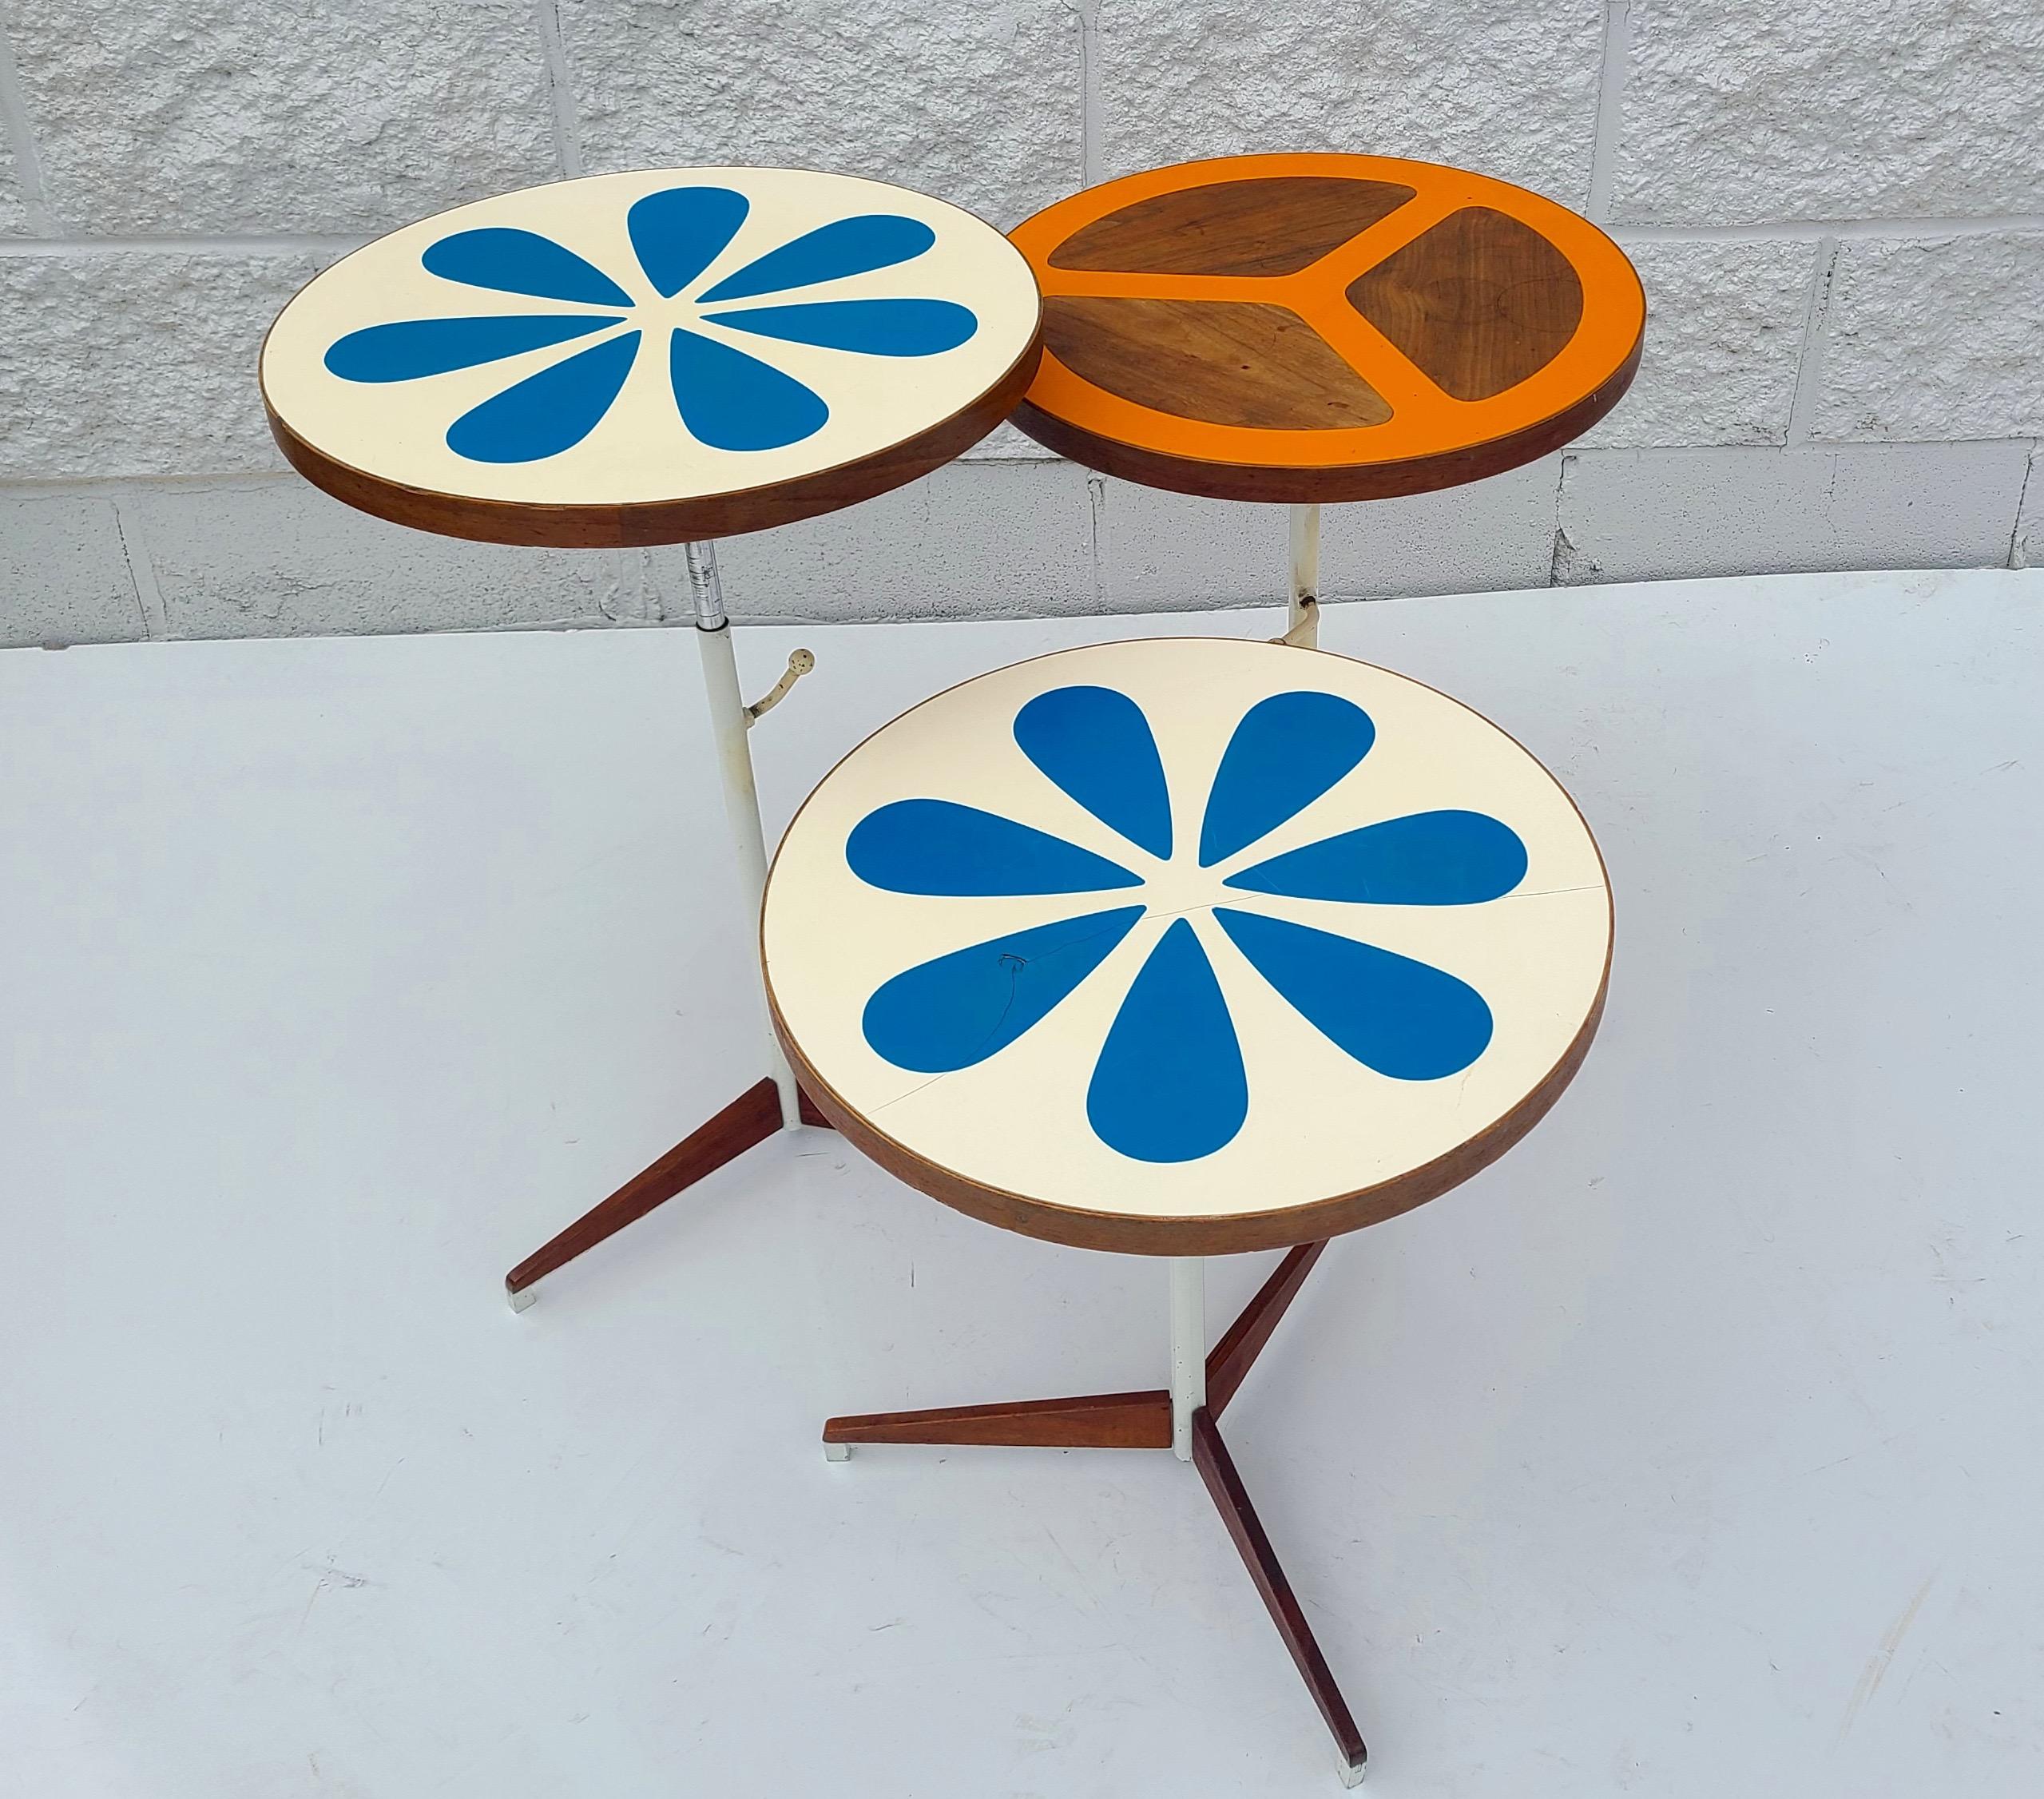 Steel Set of 3 Side Tables by Don Savage and Howard McNab for Peter Pepper Products